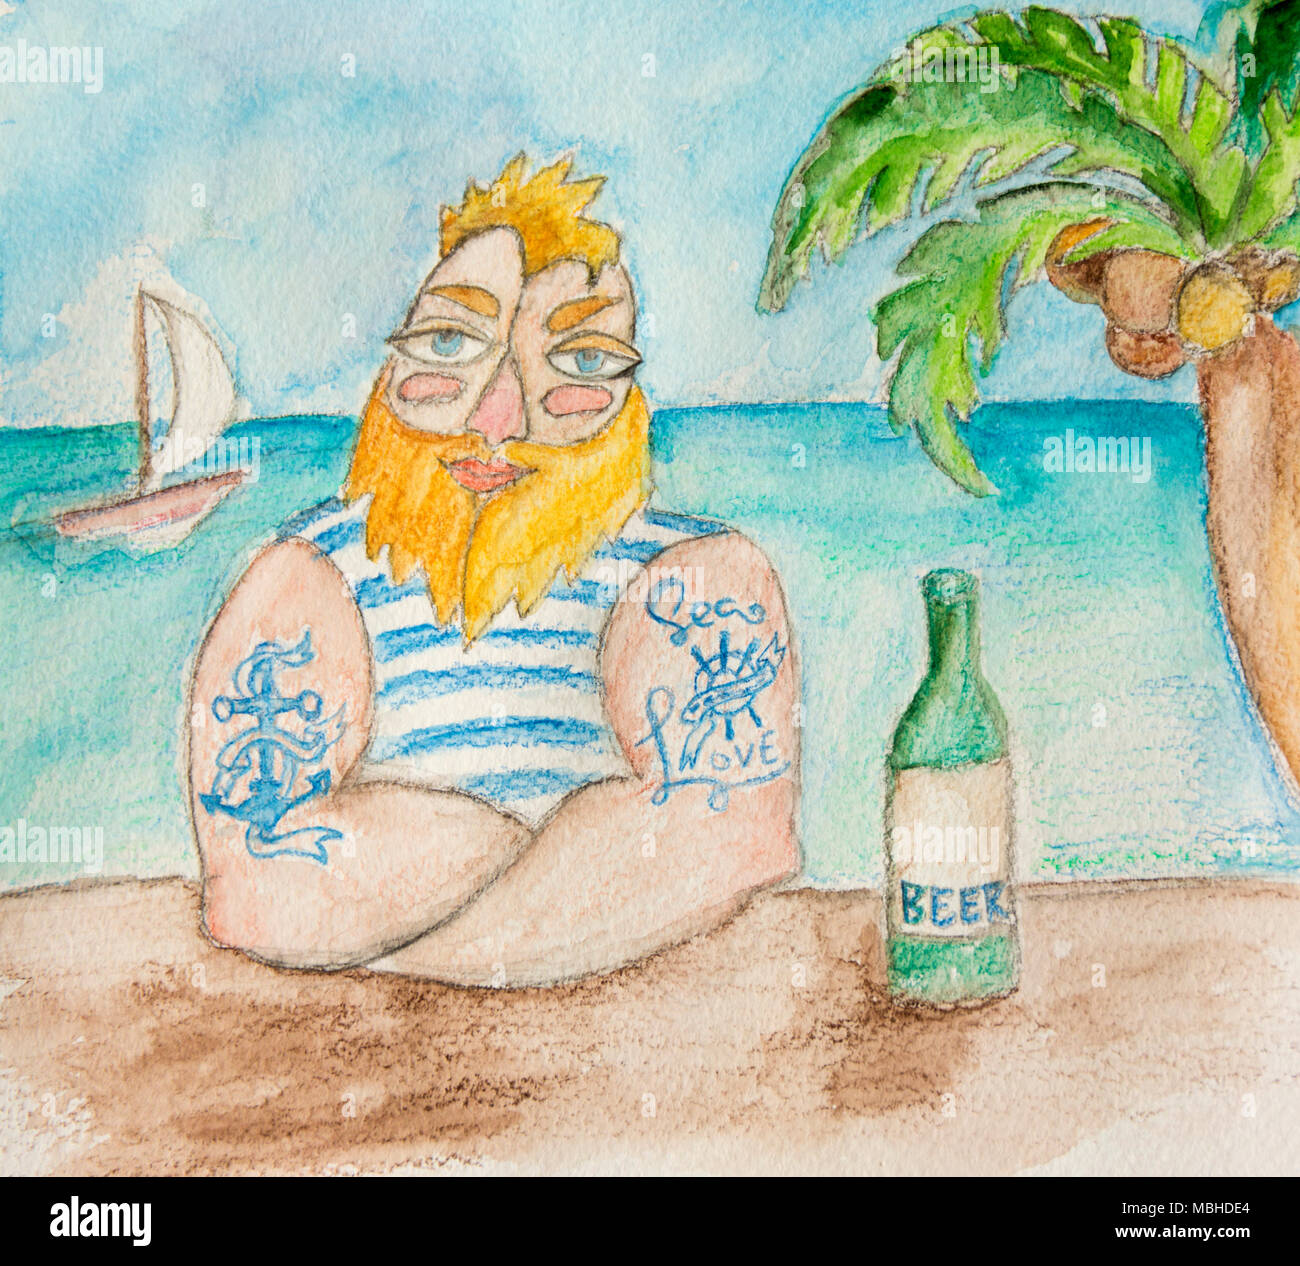 Good sailor in the blue striped vest with beer on sea background. Seamen with beard and blue tattoo in beach bar. Hand drawn illustration. Stock Photo